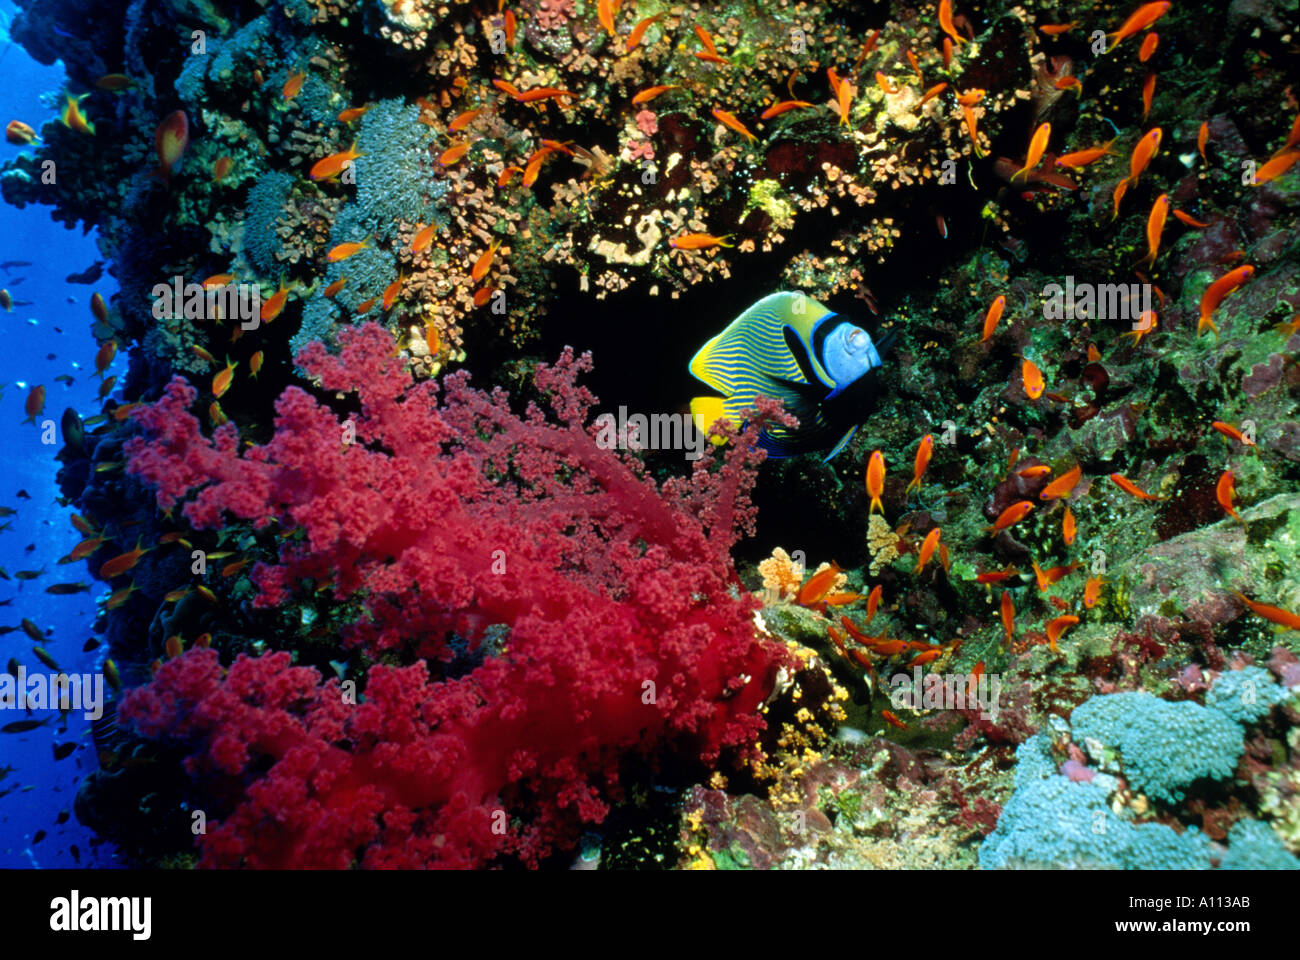 AN EMPEROR ANGELFISH EMERGES FROM BEHEND A FLOWERY STALK OF SOFT CORALS IN THE RED SEA Stock Photo